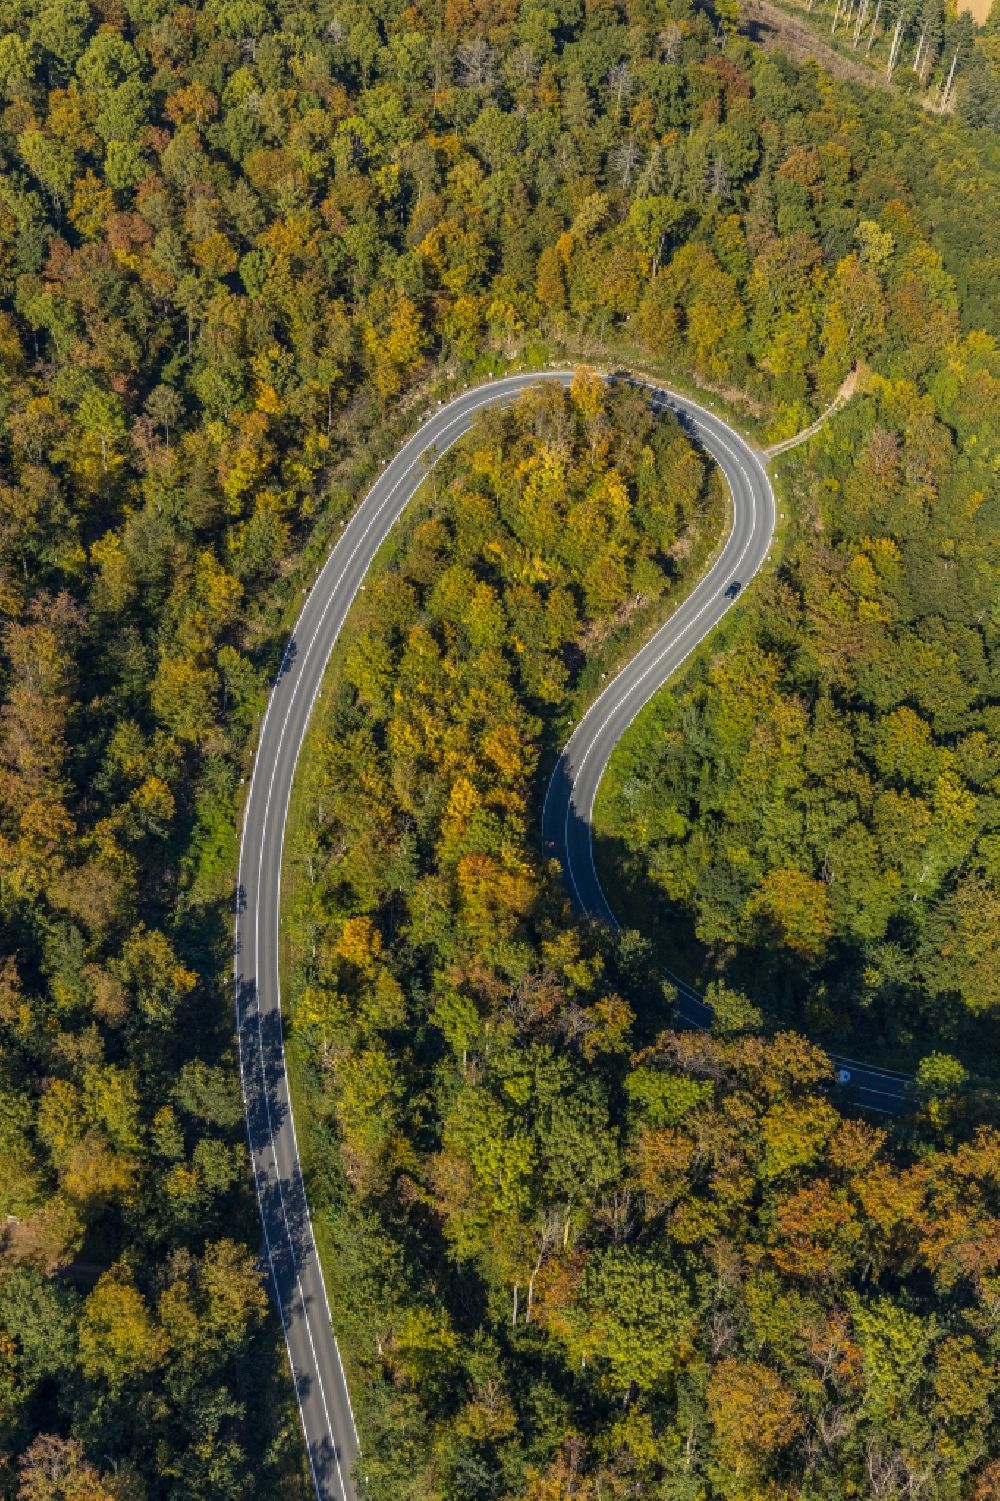 Beverungen from the bird's eye view: Serpentine-shaped curve of a road guide of the country road L838 in Beverungen in the state North Rhine-Westphalia, Germany